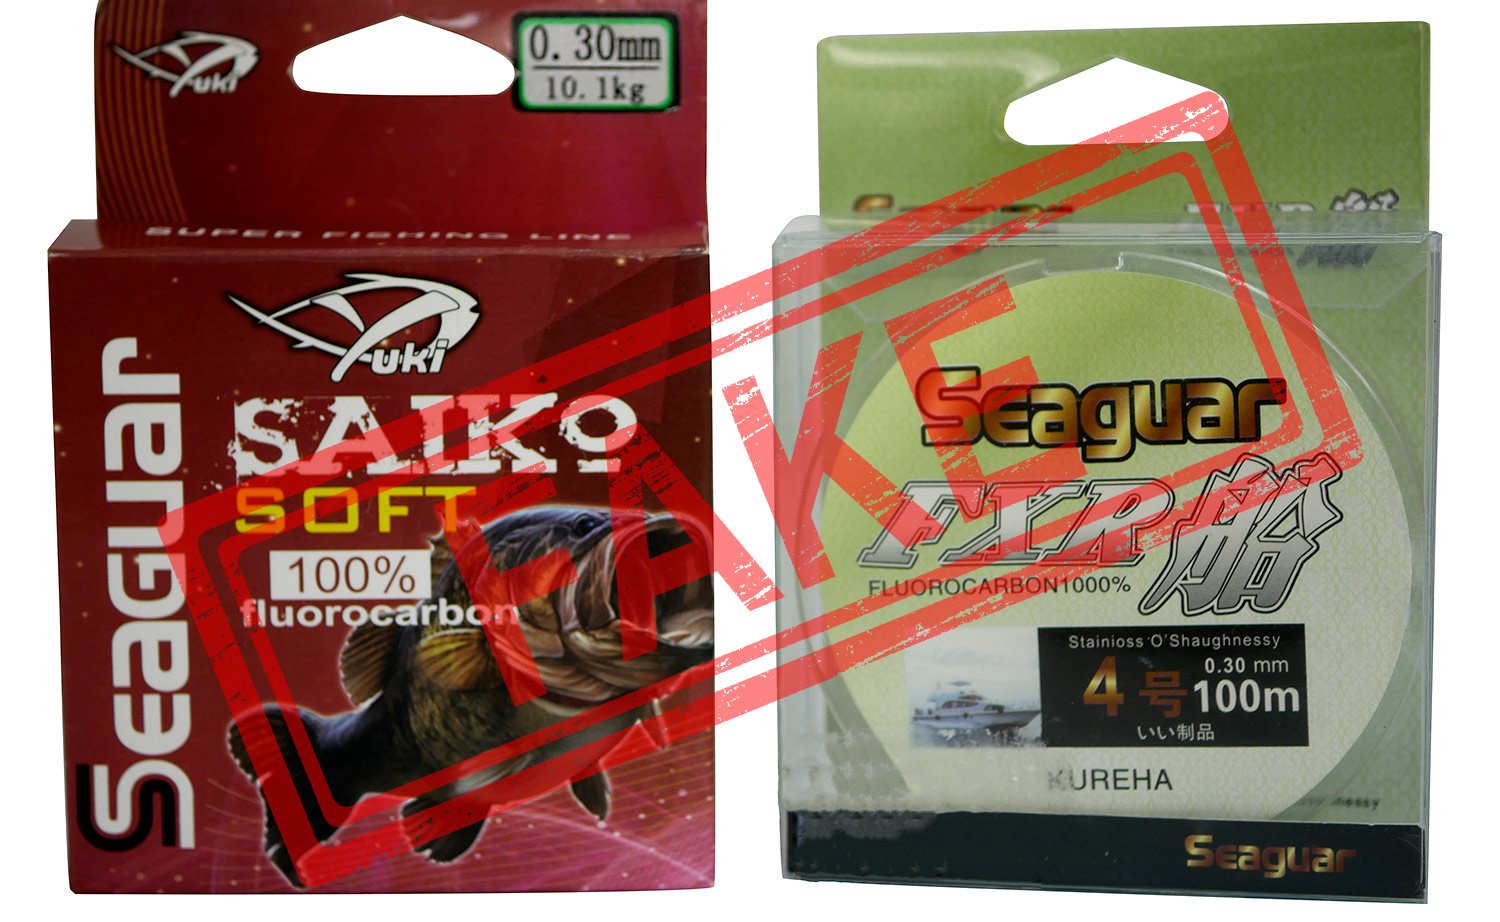 Attention!! Yuki and Seaguar fishing lines counterfeits